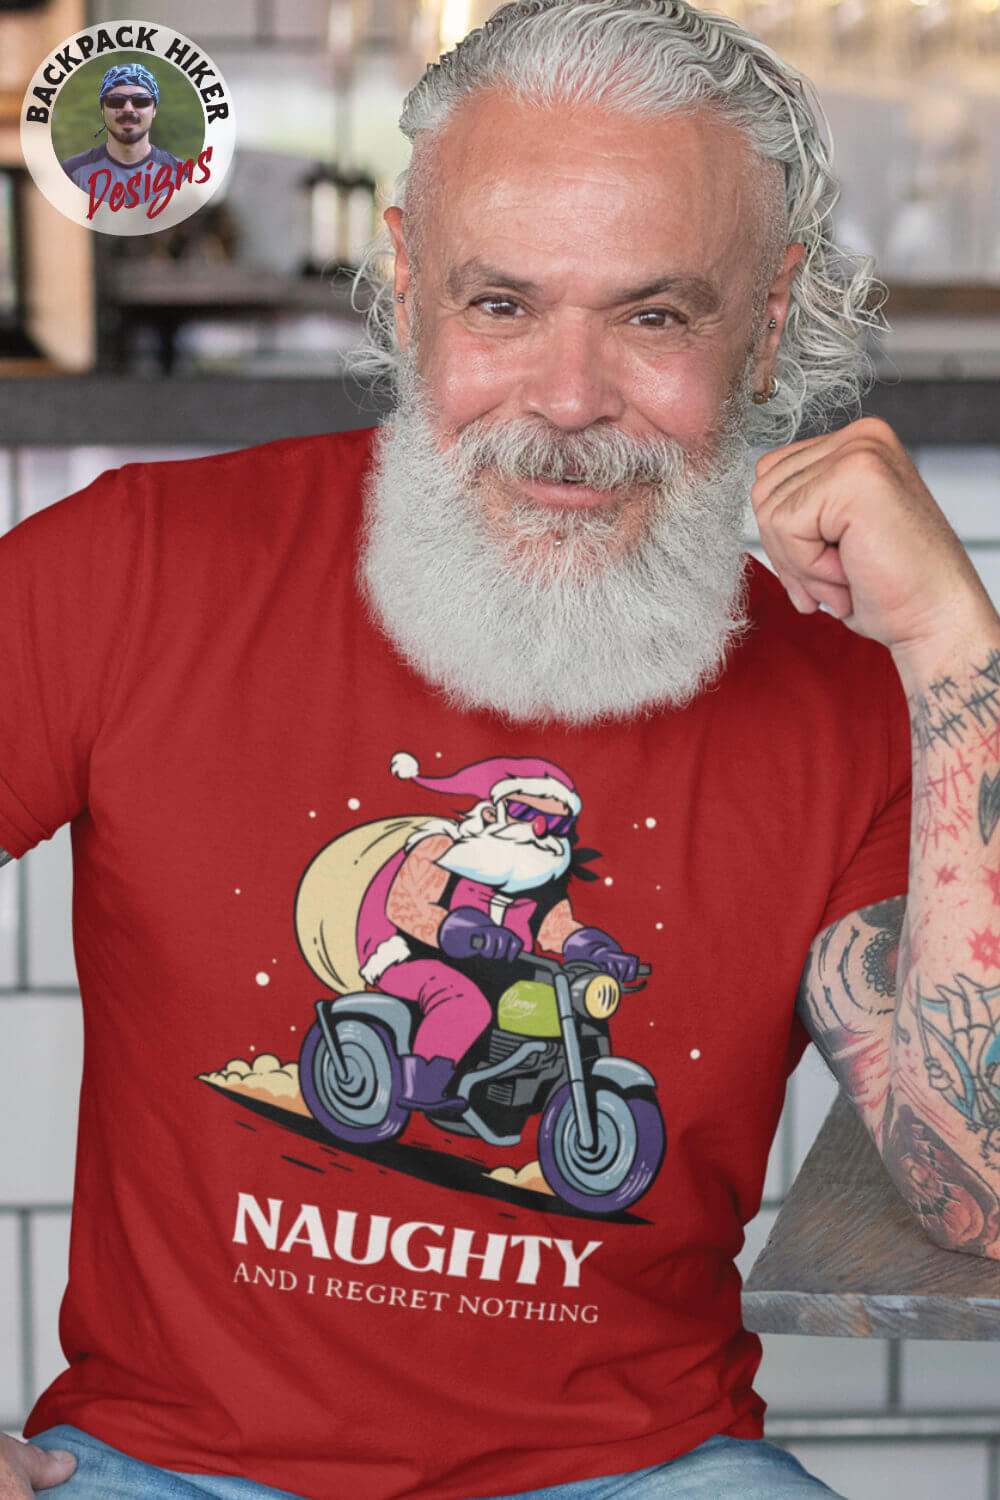 Naughty and I regret nothing - Biker Claus